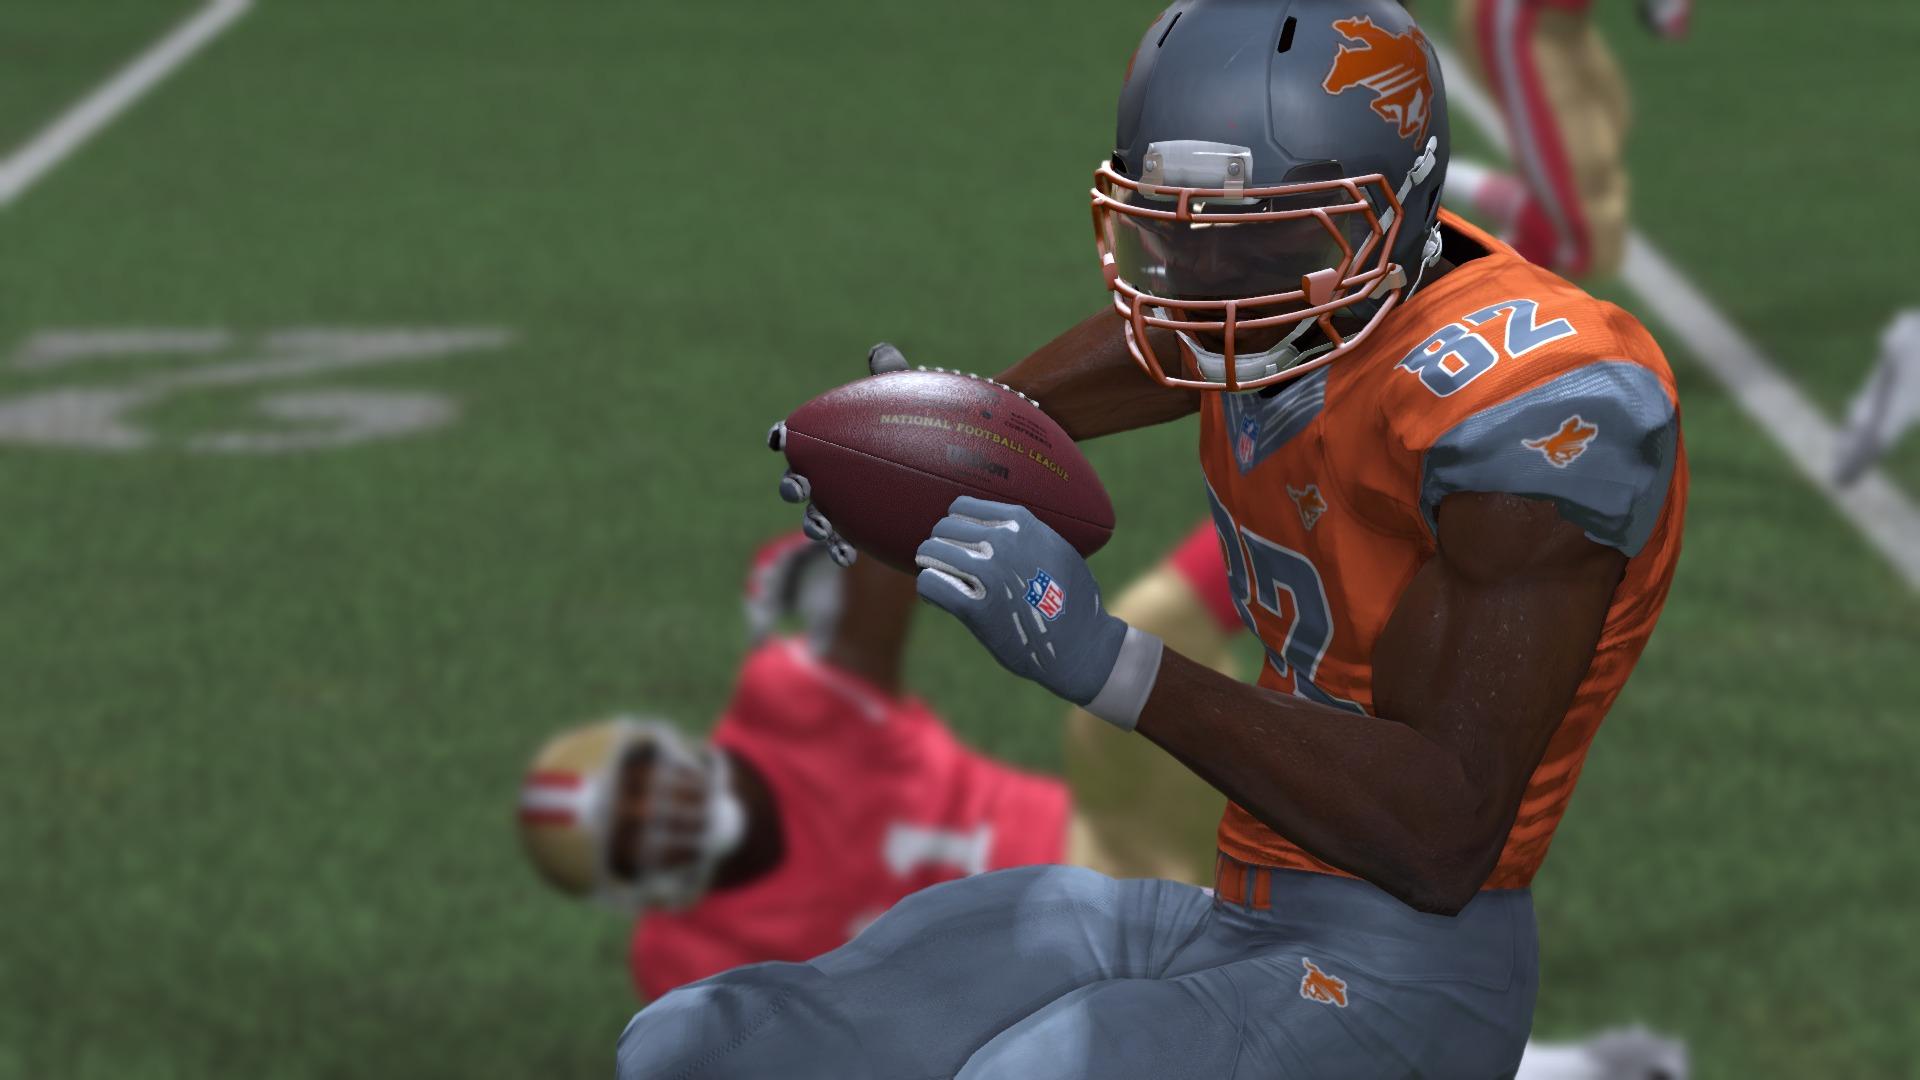 Madden NFL 15: Pictures of all of the relocation cities and